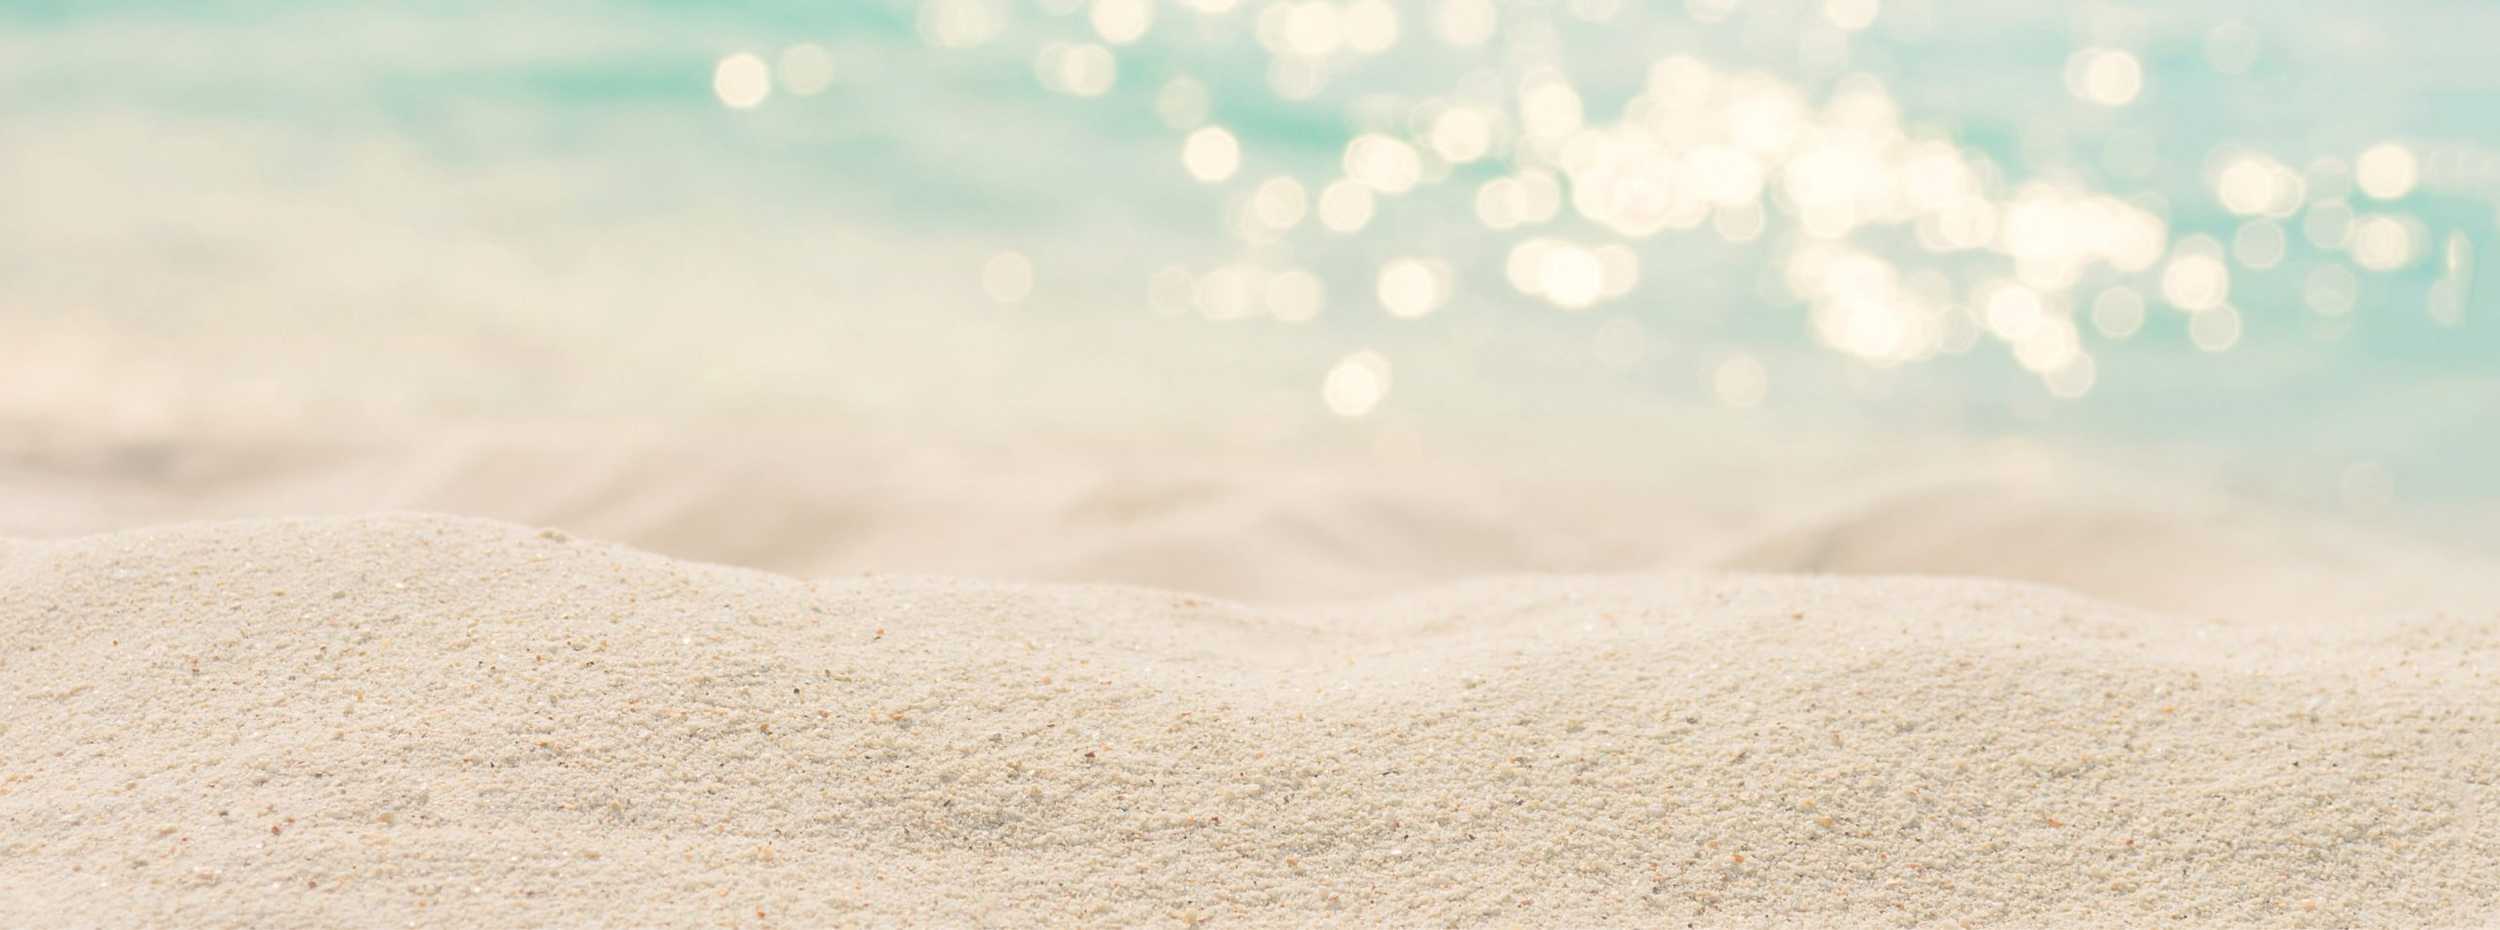 A picture of sand and beach.